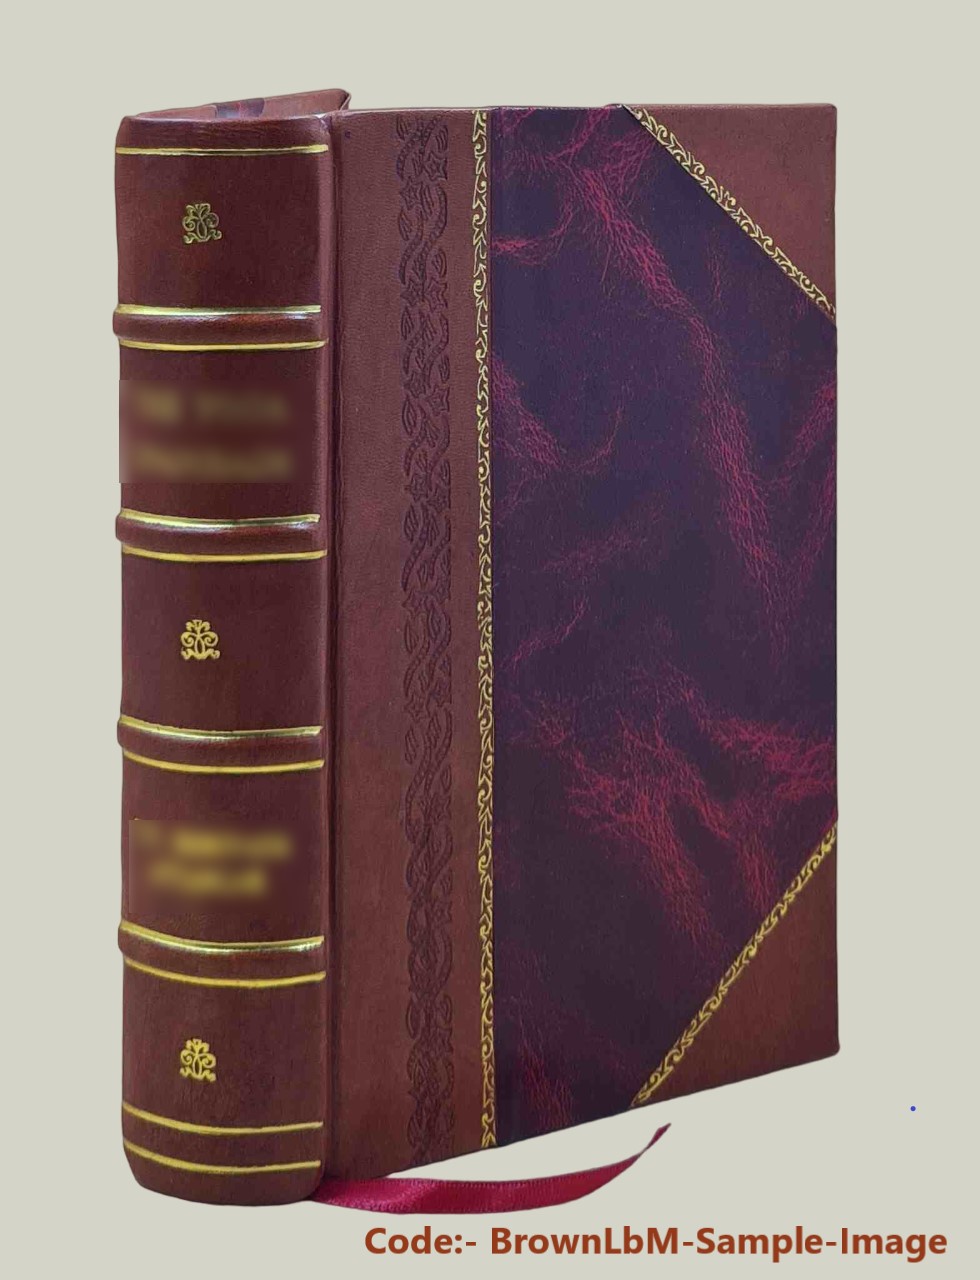 Aeneidea; or, Critical, exegetical, and aesthetical remarks on the Aeneis, with a personal collation of all the first class Mss. upwards of one ... and all the principal editions. [Book 2]